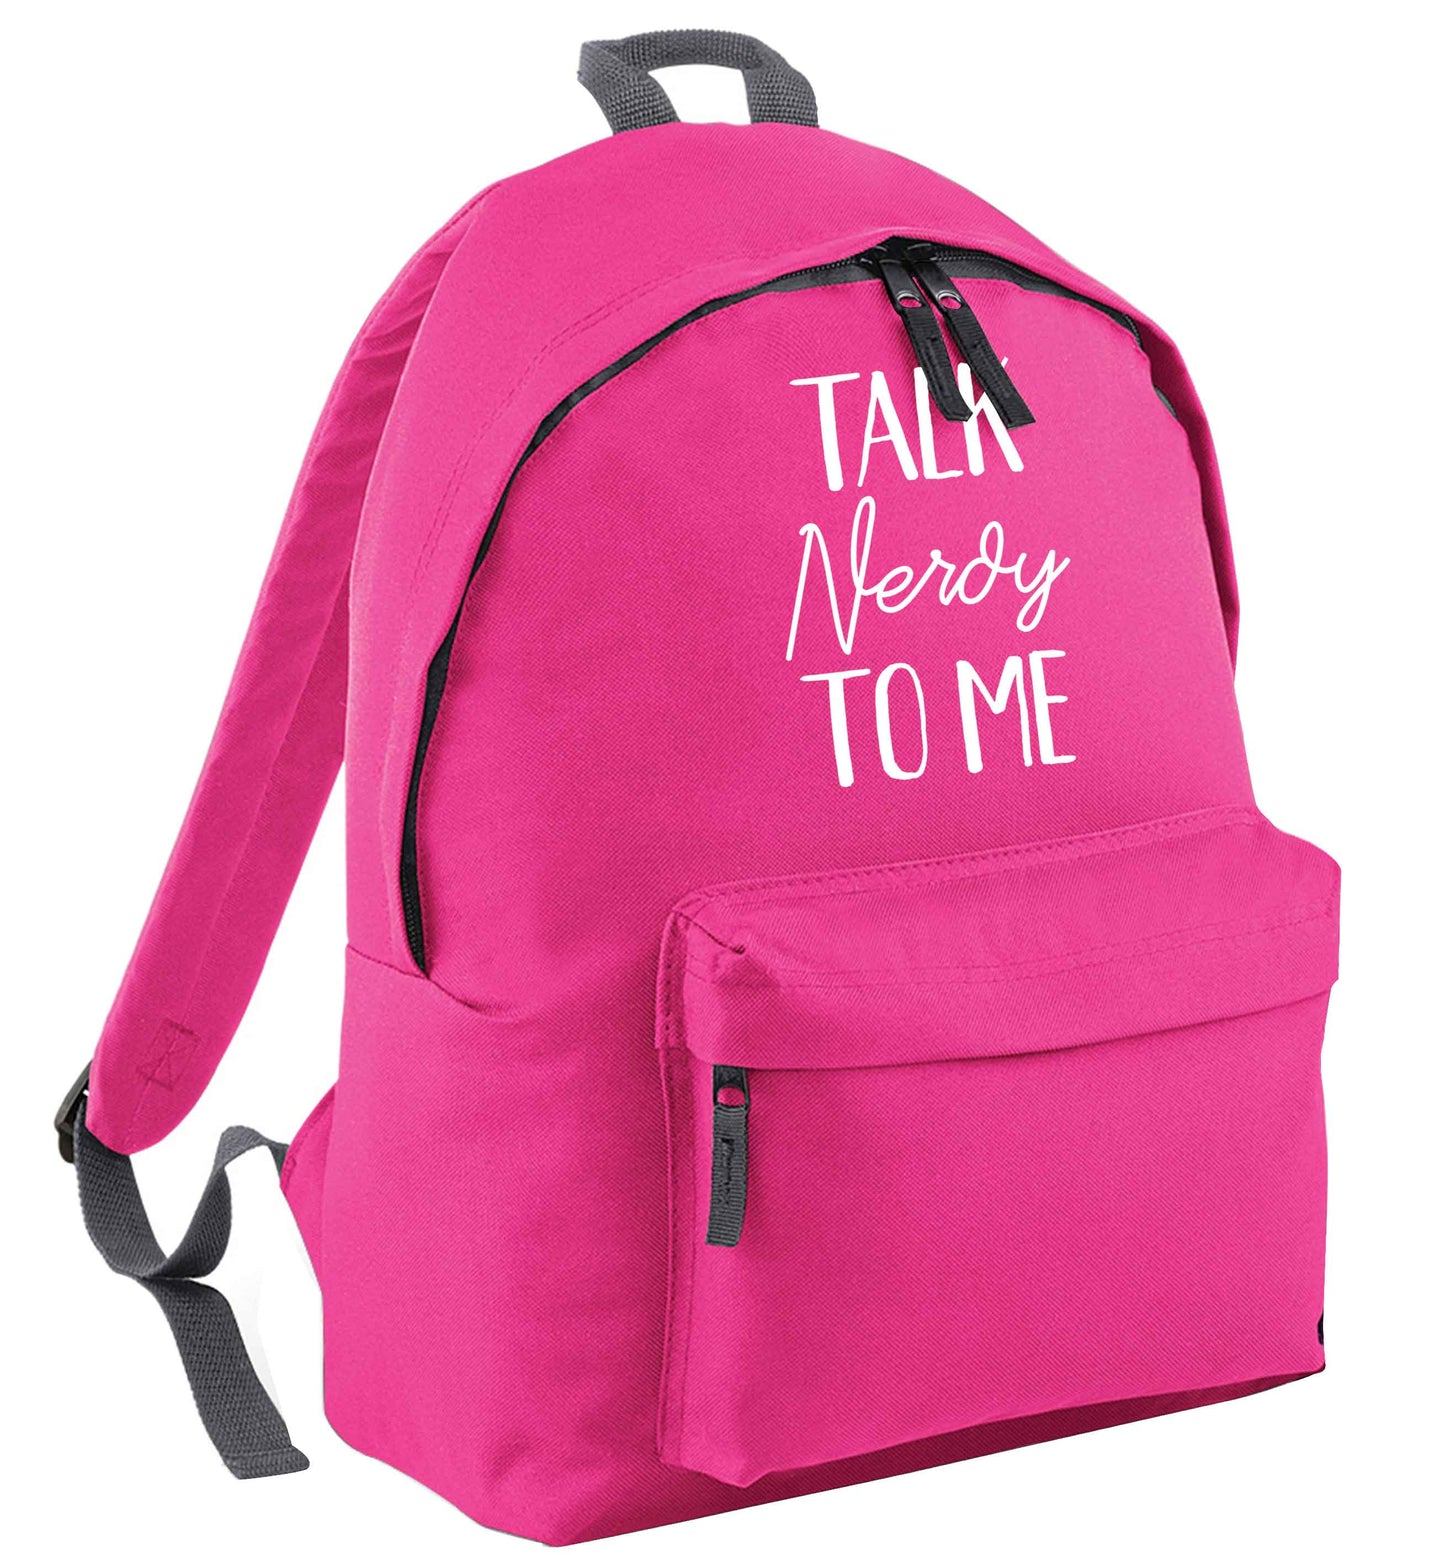 Talk nerdy to me pink adults backpack